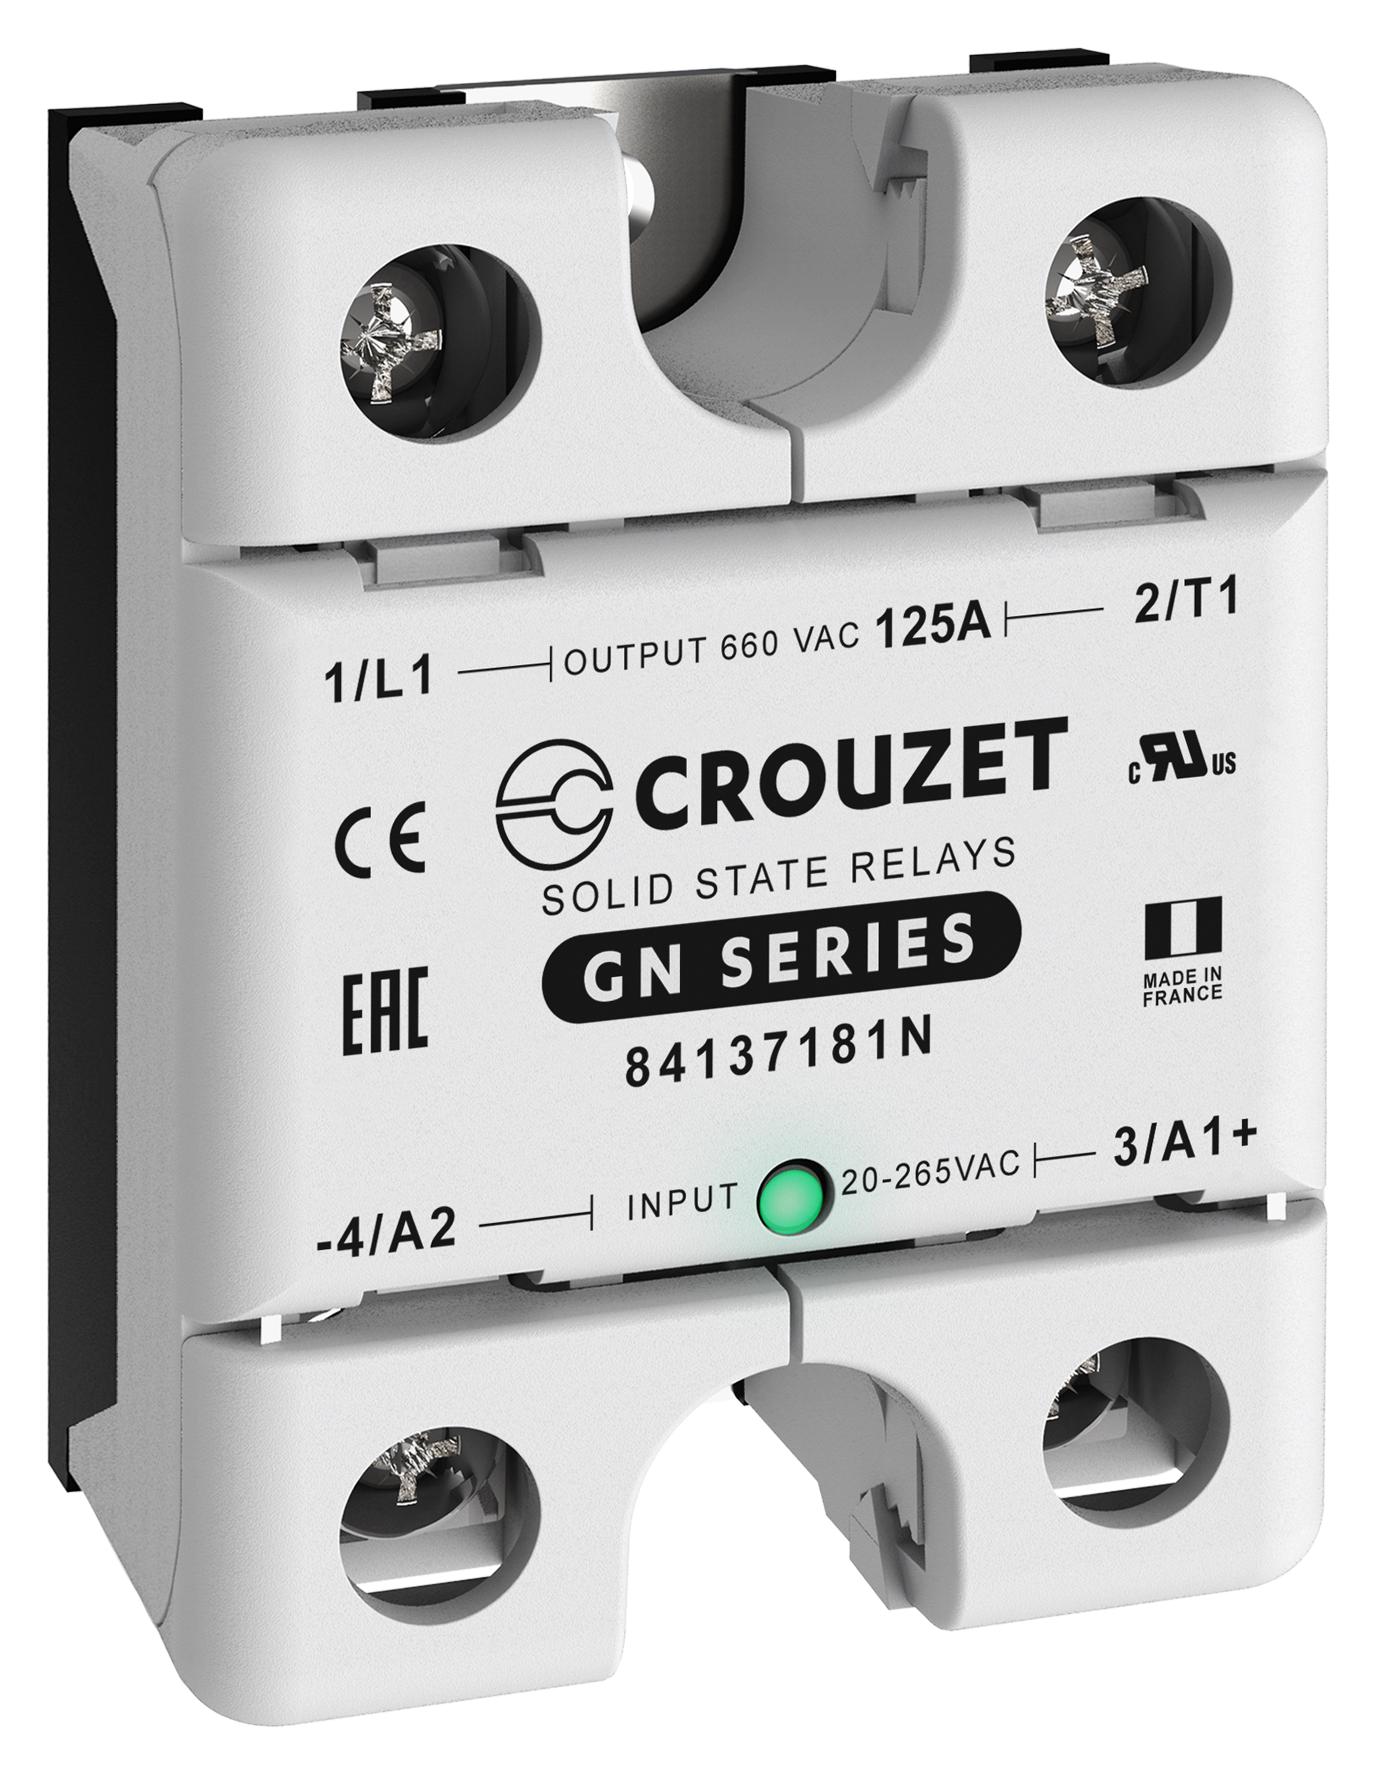 84137181N SOLID STATE RELAY, 125A, 48-660VAC/PANEL CROUZET